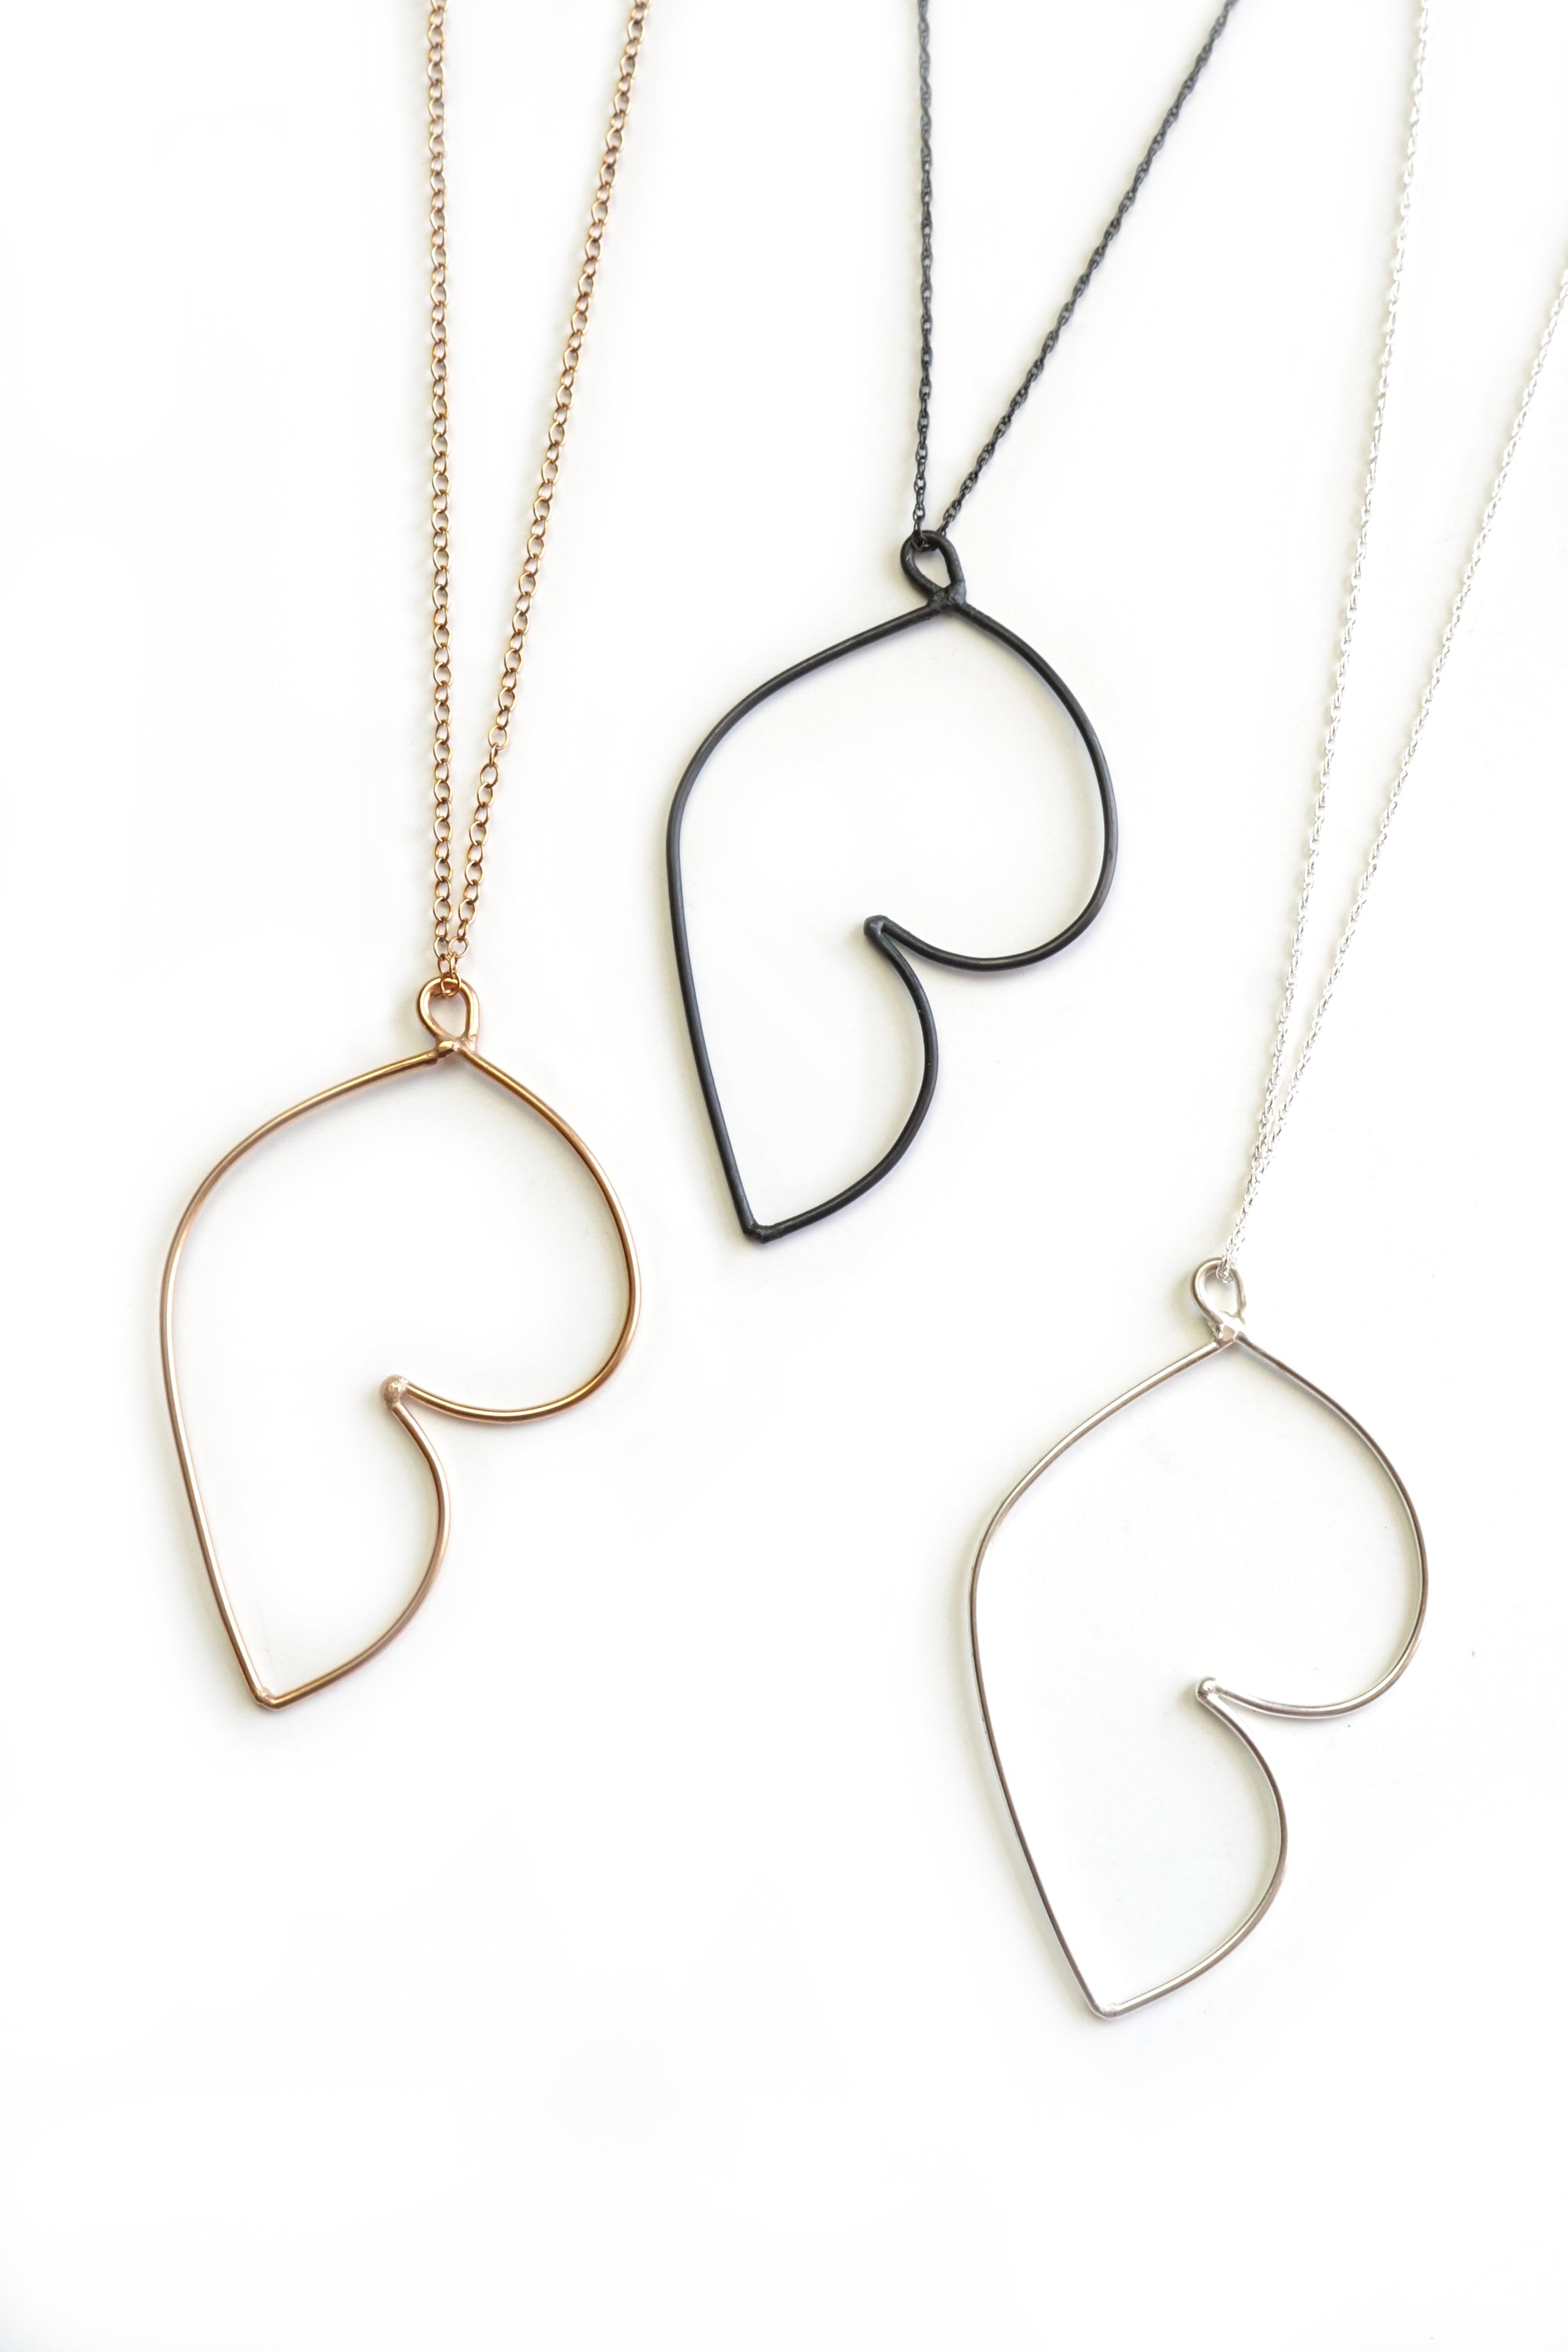 Matisse inspired jewelry - bronze, black, and silver pendants